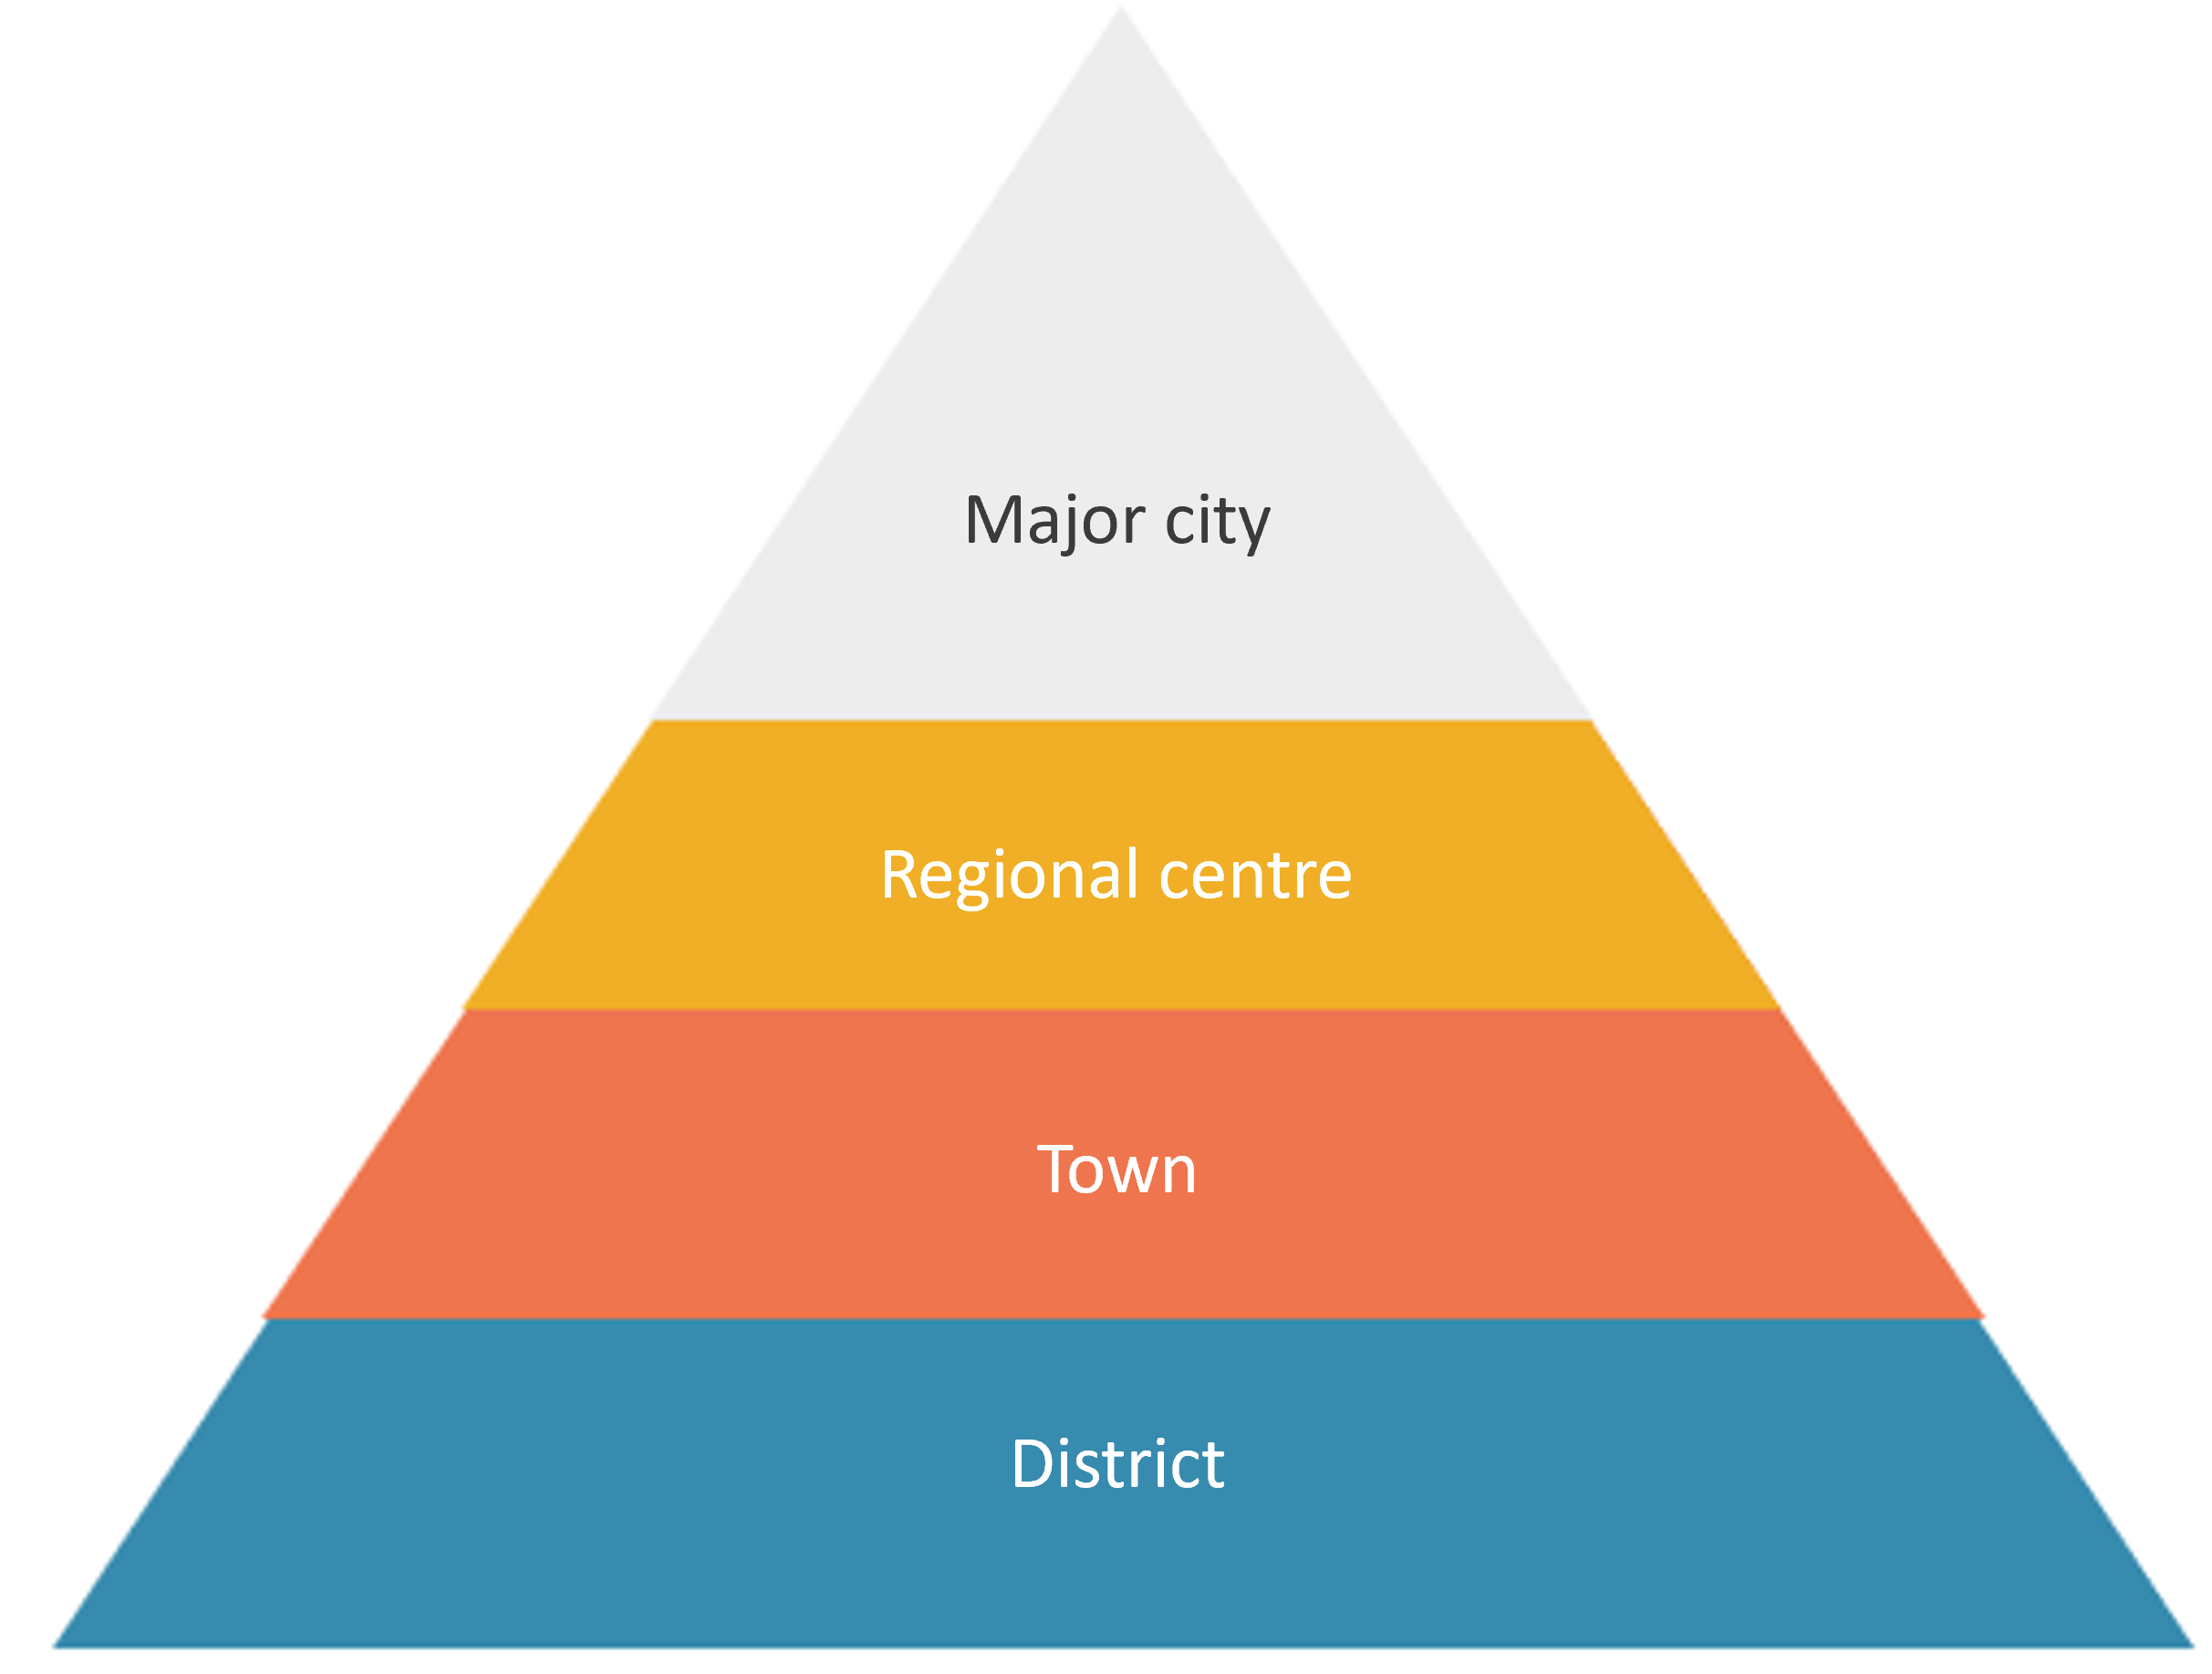 Pyramid image with Major city at top and district at bottom